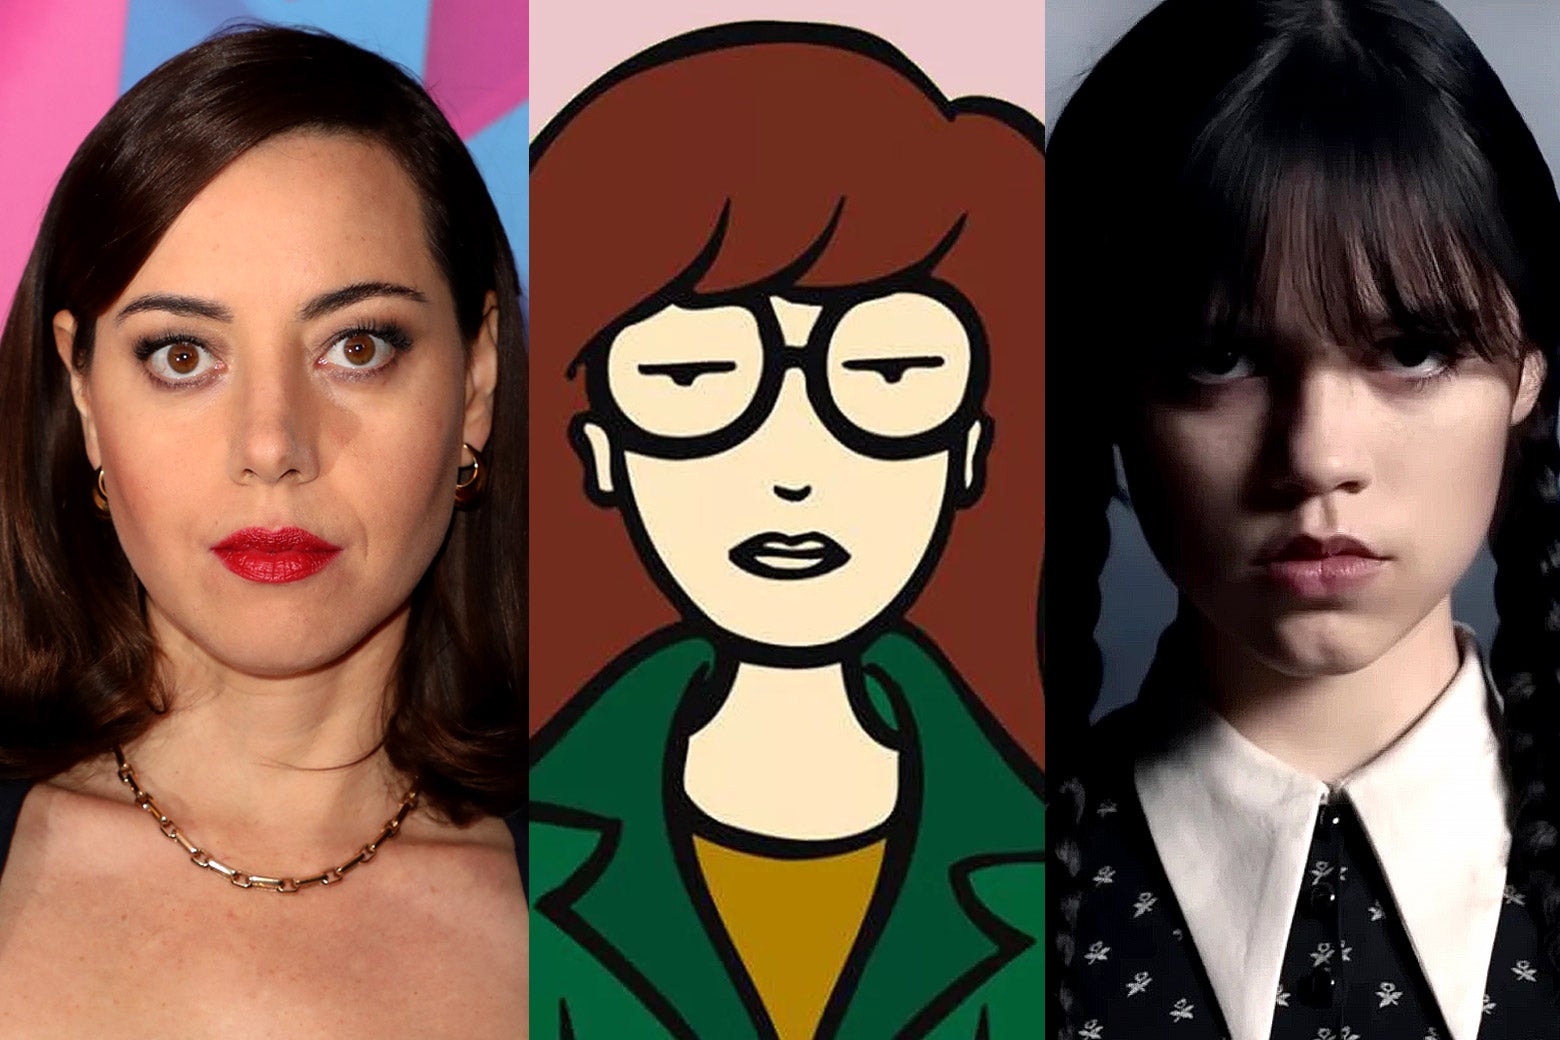 Aubrey Plaza, Daria, and Wednesday Addams, all with very expressionless faces.